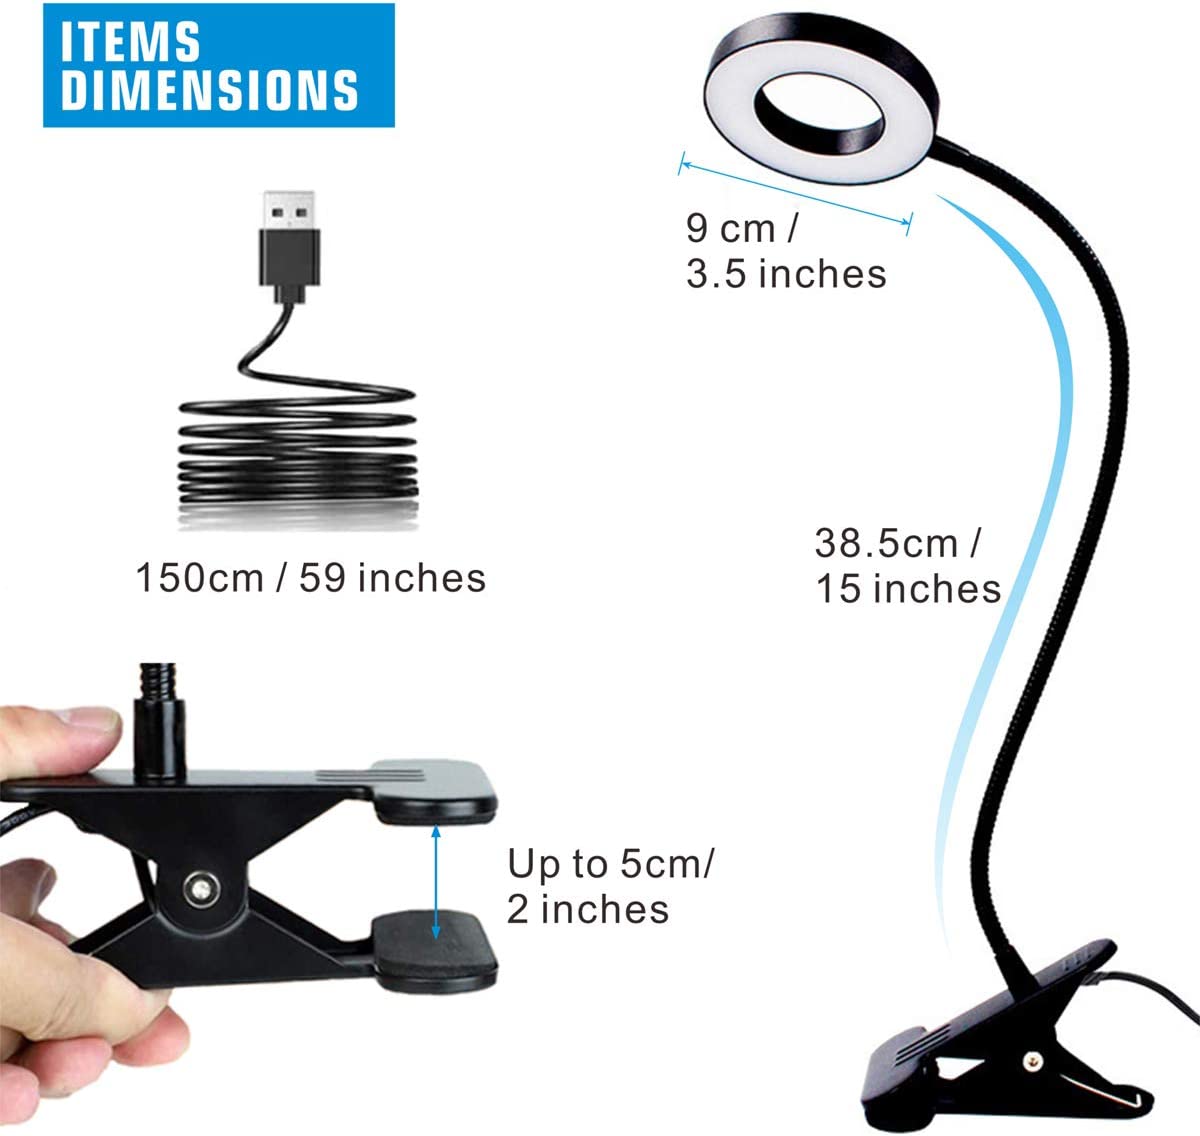 KNAMKY USB [Energy Class A++] LED Clip Lamp, 3 Light Mode, 10 Dimmable Brightness, Eye Caring Desk/Book Light for Reading, Studying, Working, and Video Conferencing (Black) 5